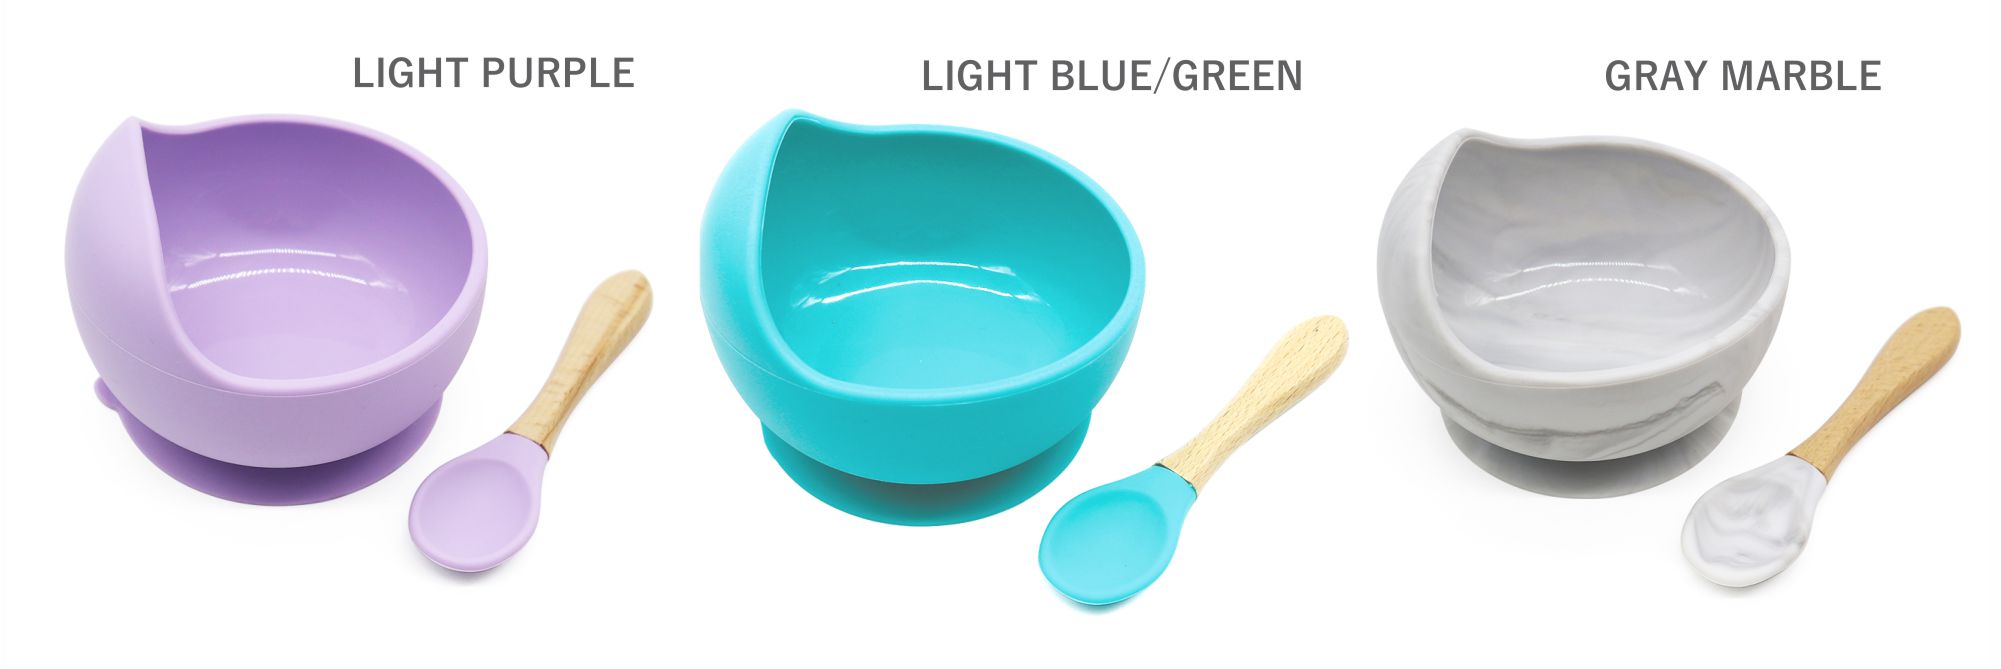 Magic Stay-put Baby Bowl & Spoon Set in Brilliant Gray